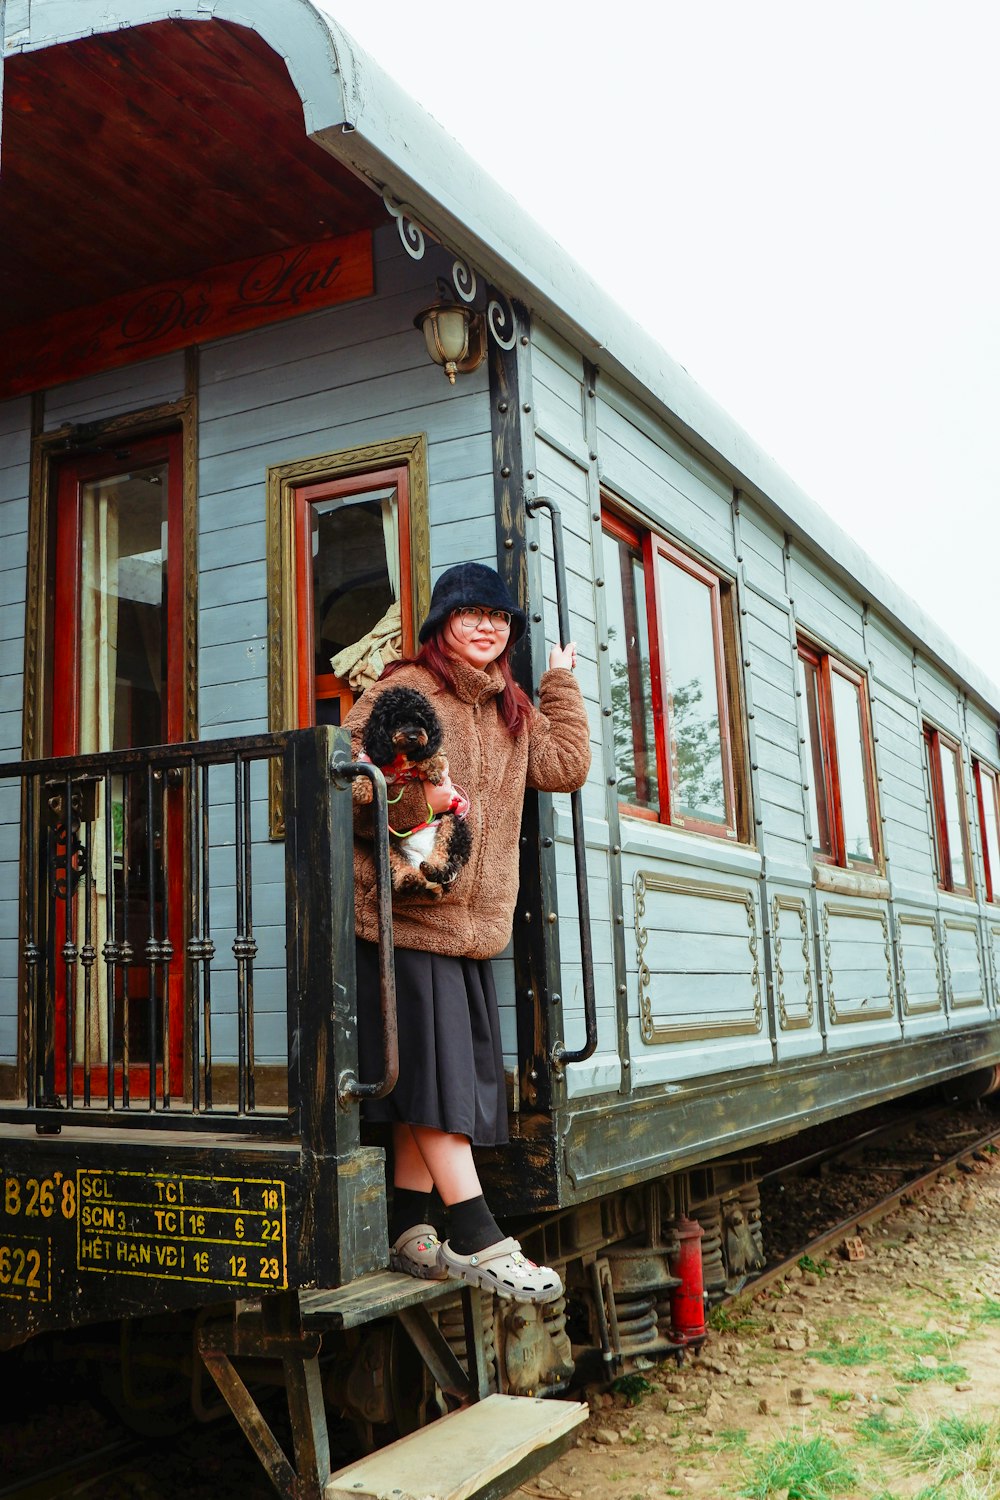 a woman holding a dog standing on a train car